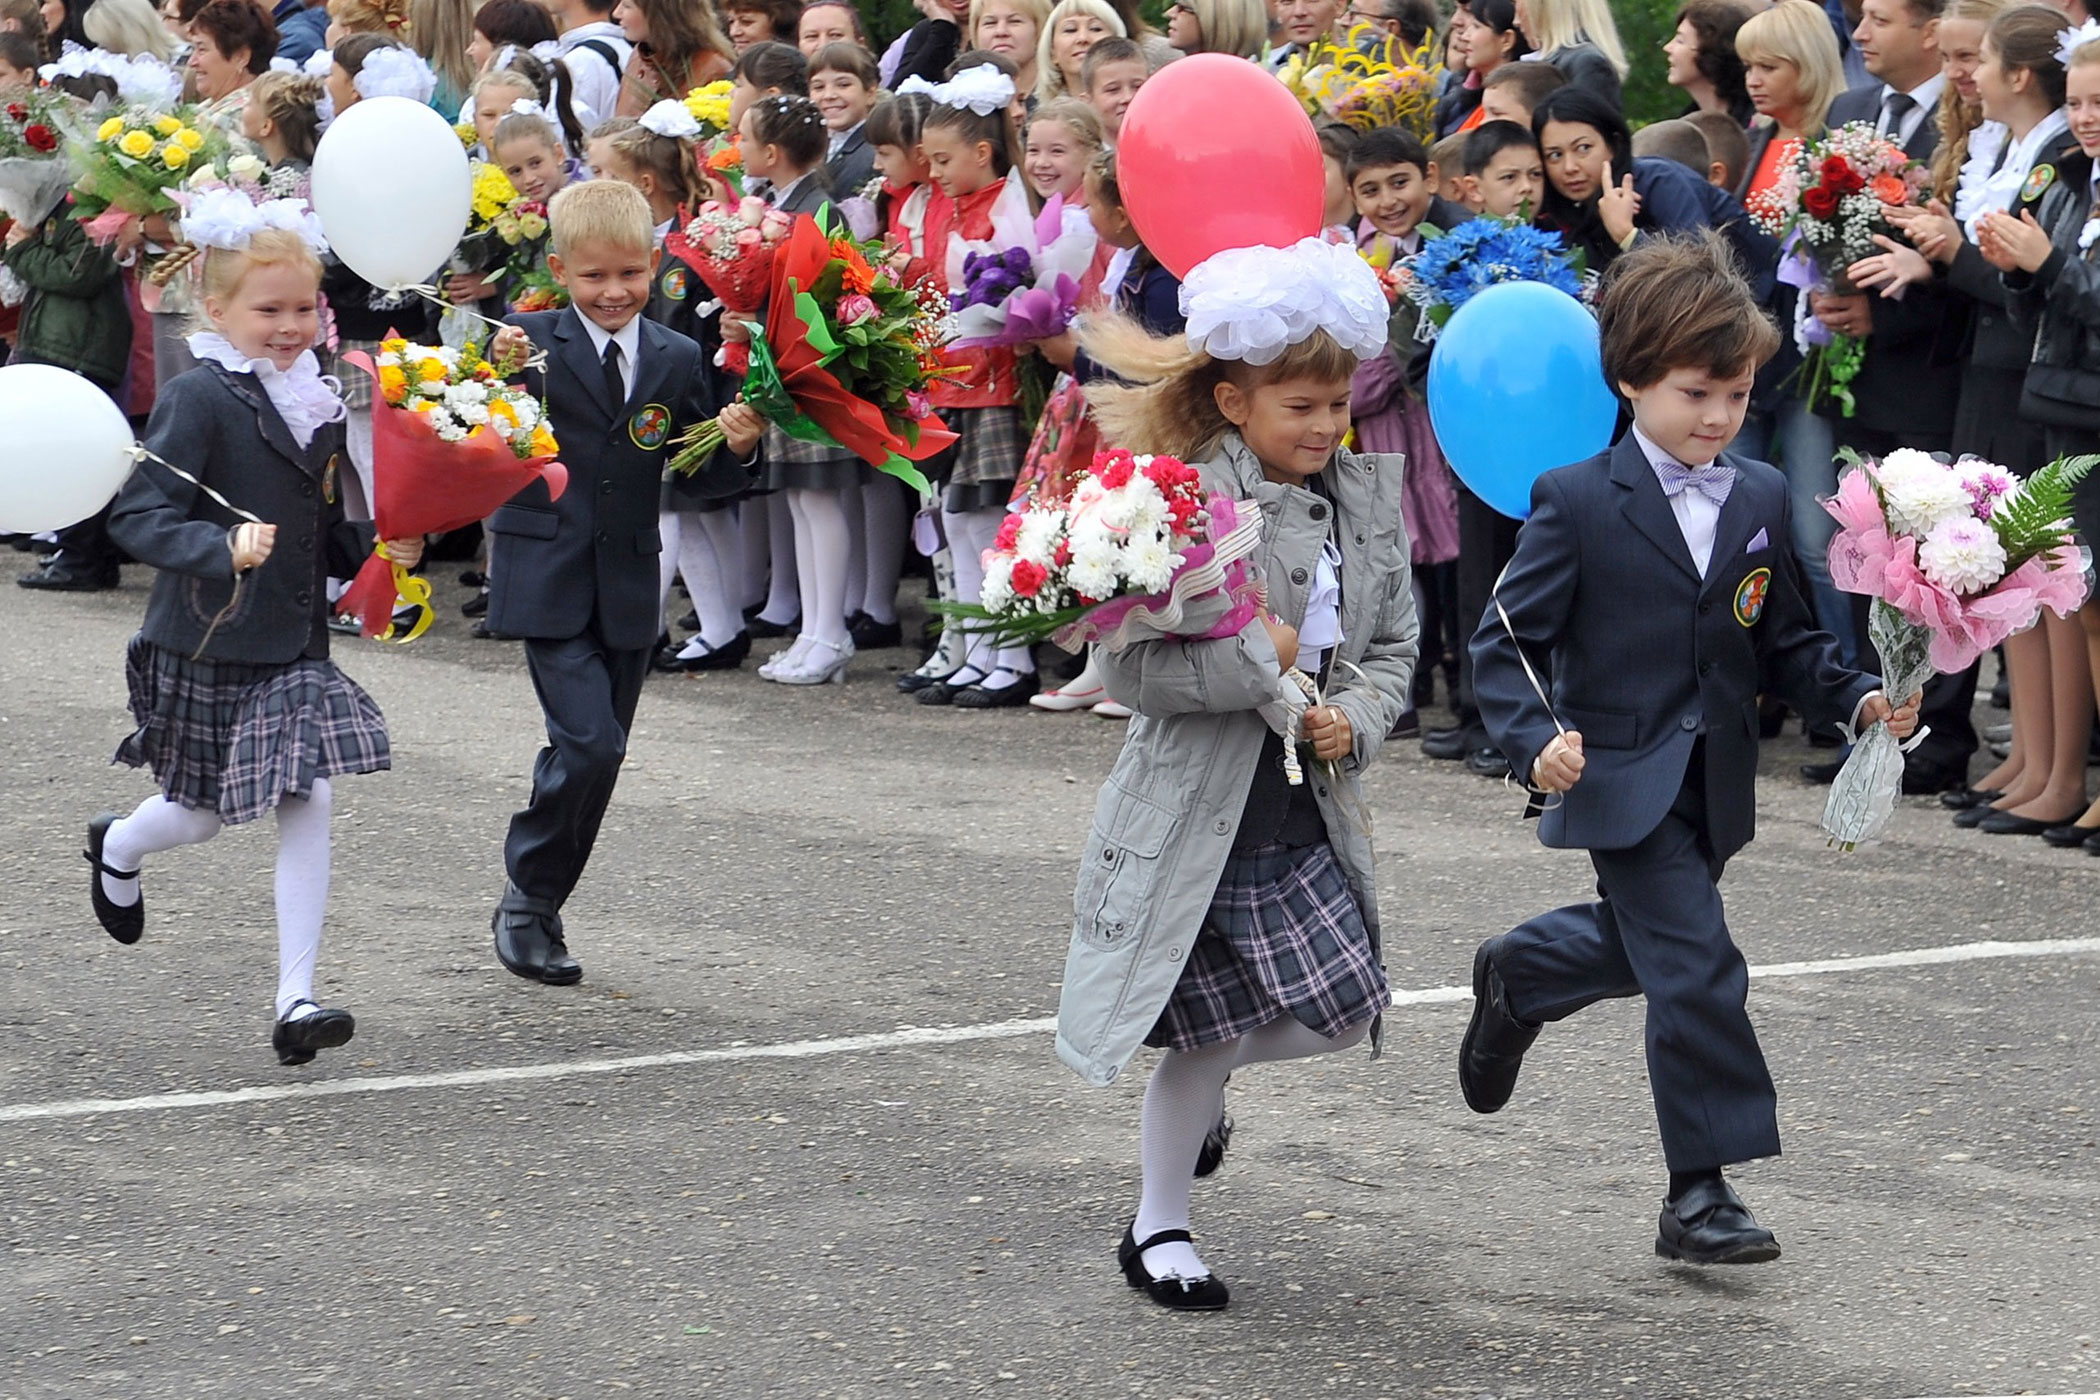 First grade students line up at school during the start of a new school year on Knowledge Day in Ryazan, Russia.